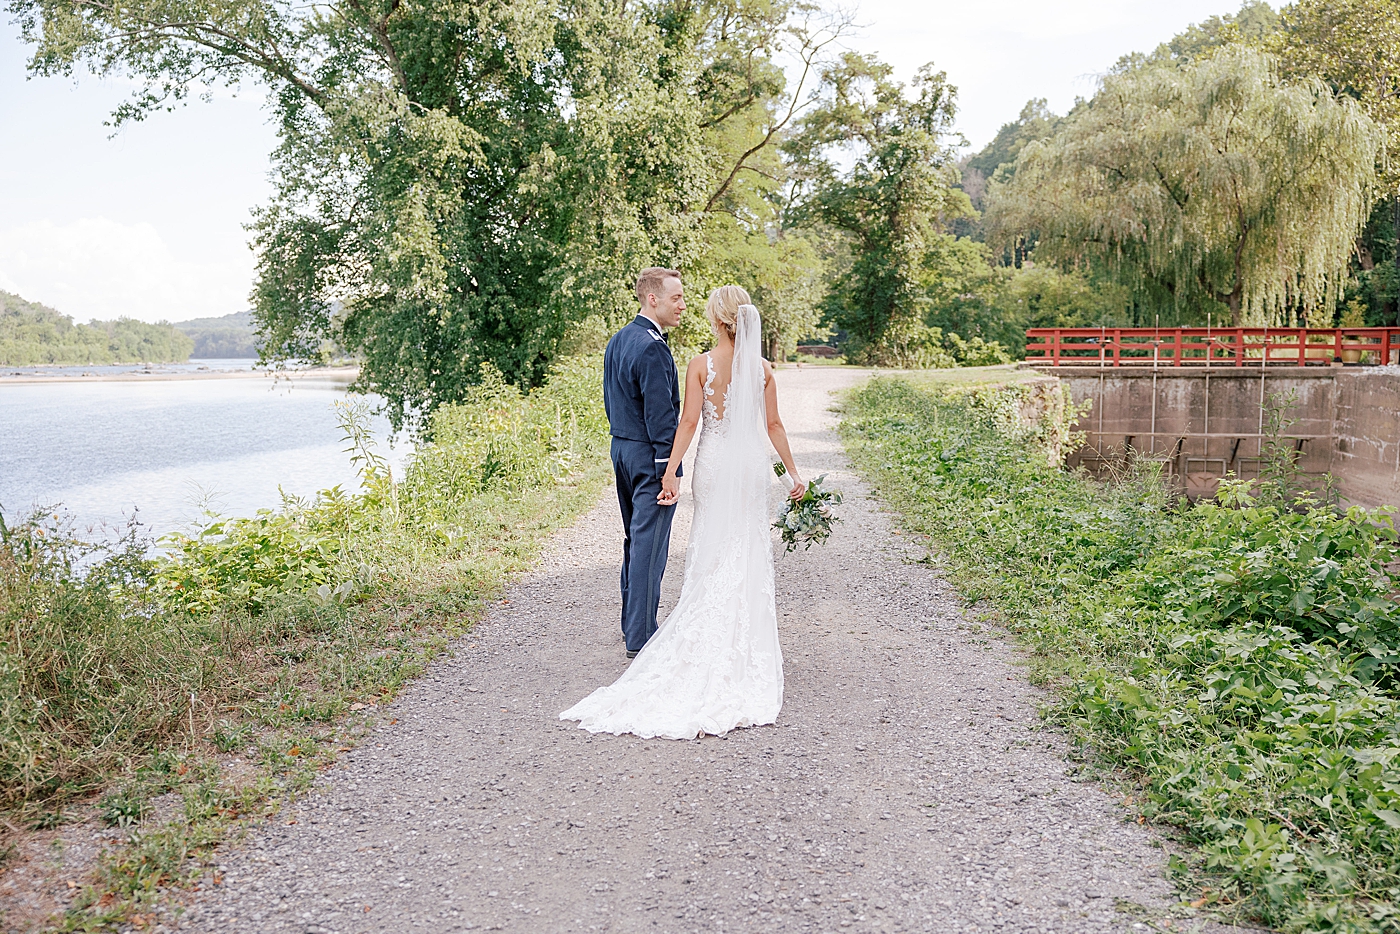 Bride and groom walking on a path | Image by Hope Helmuth Photography